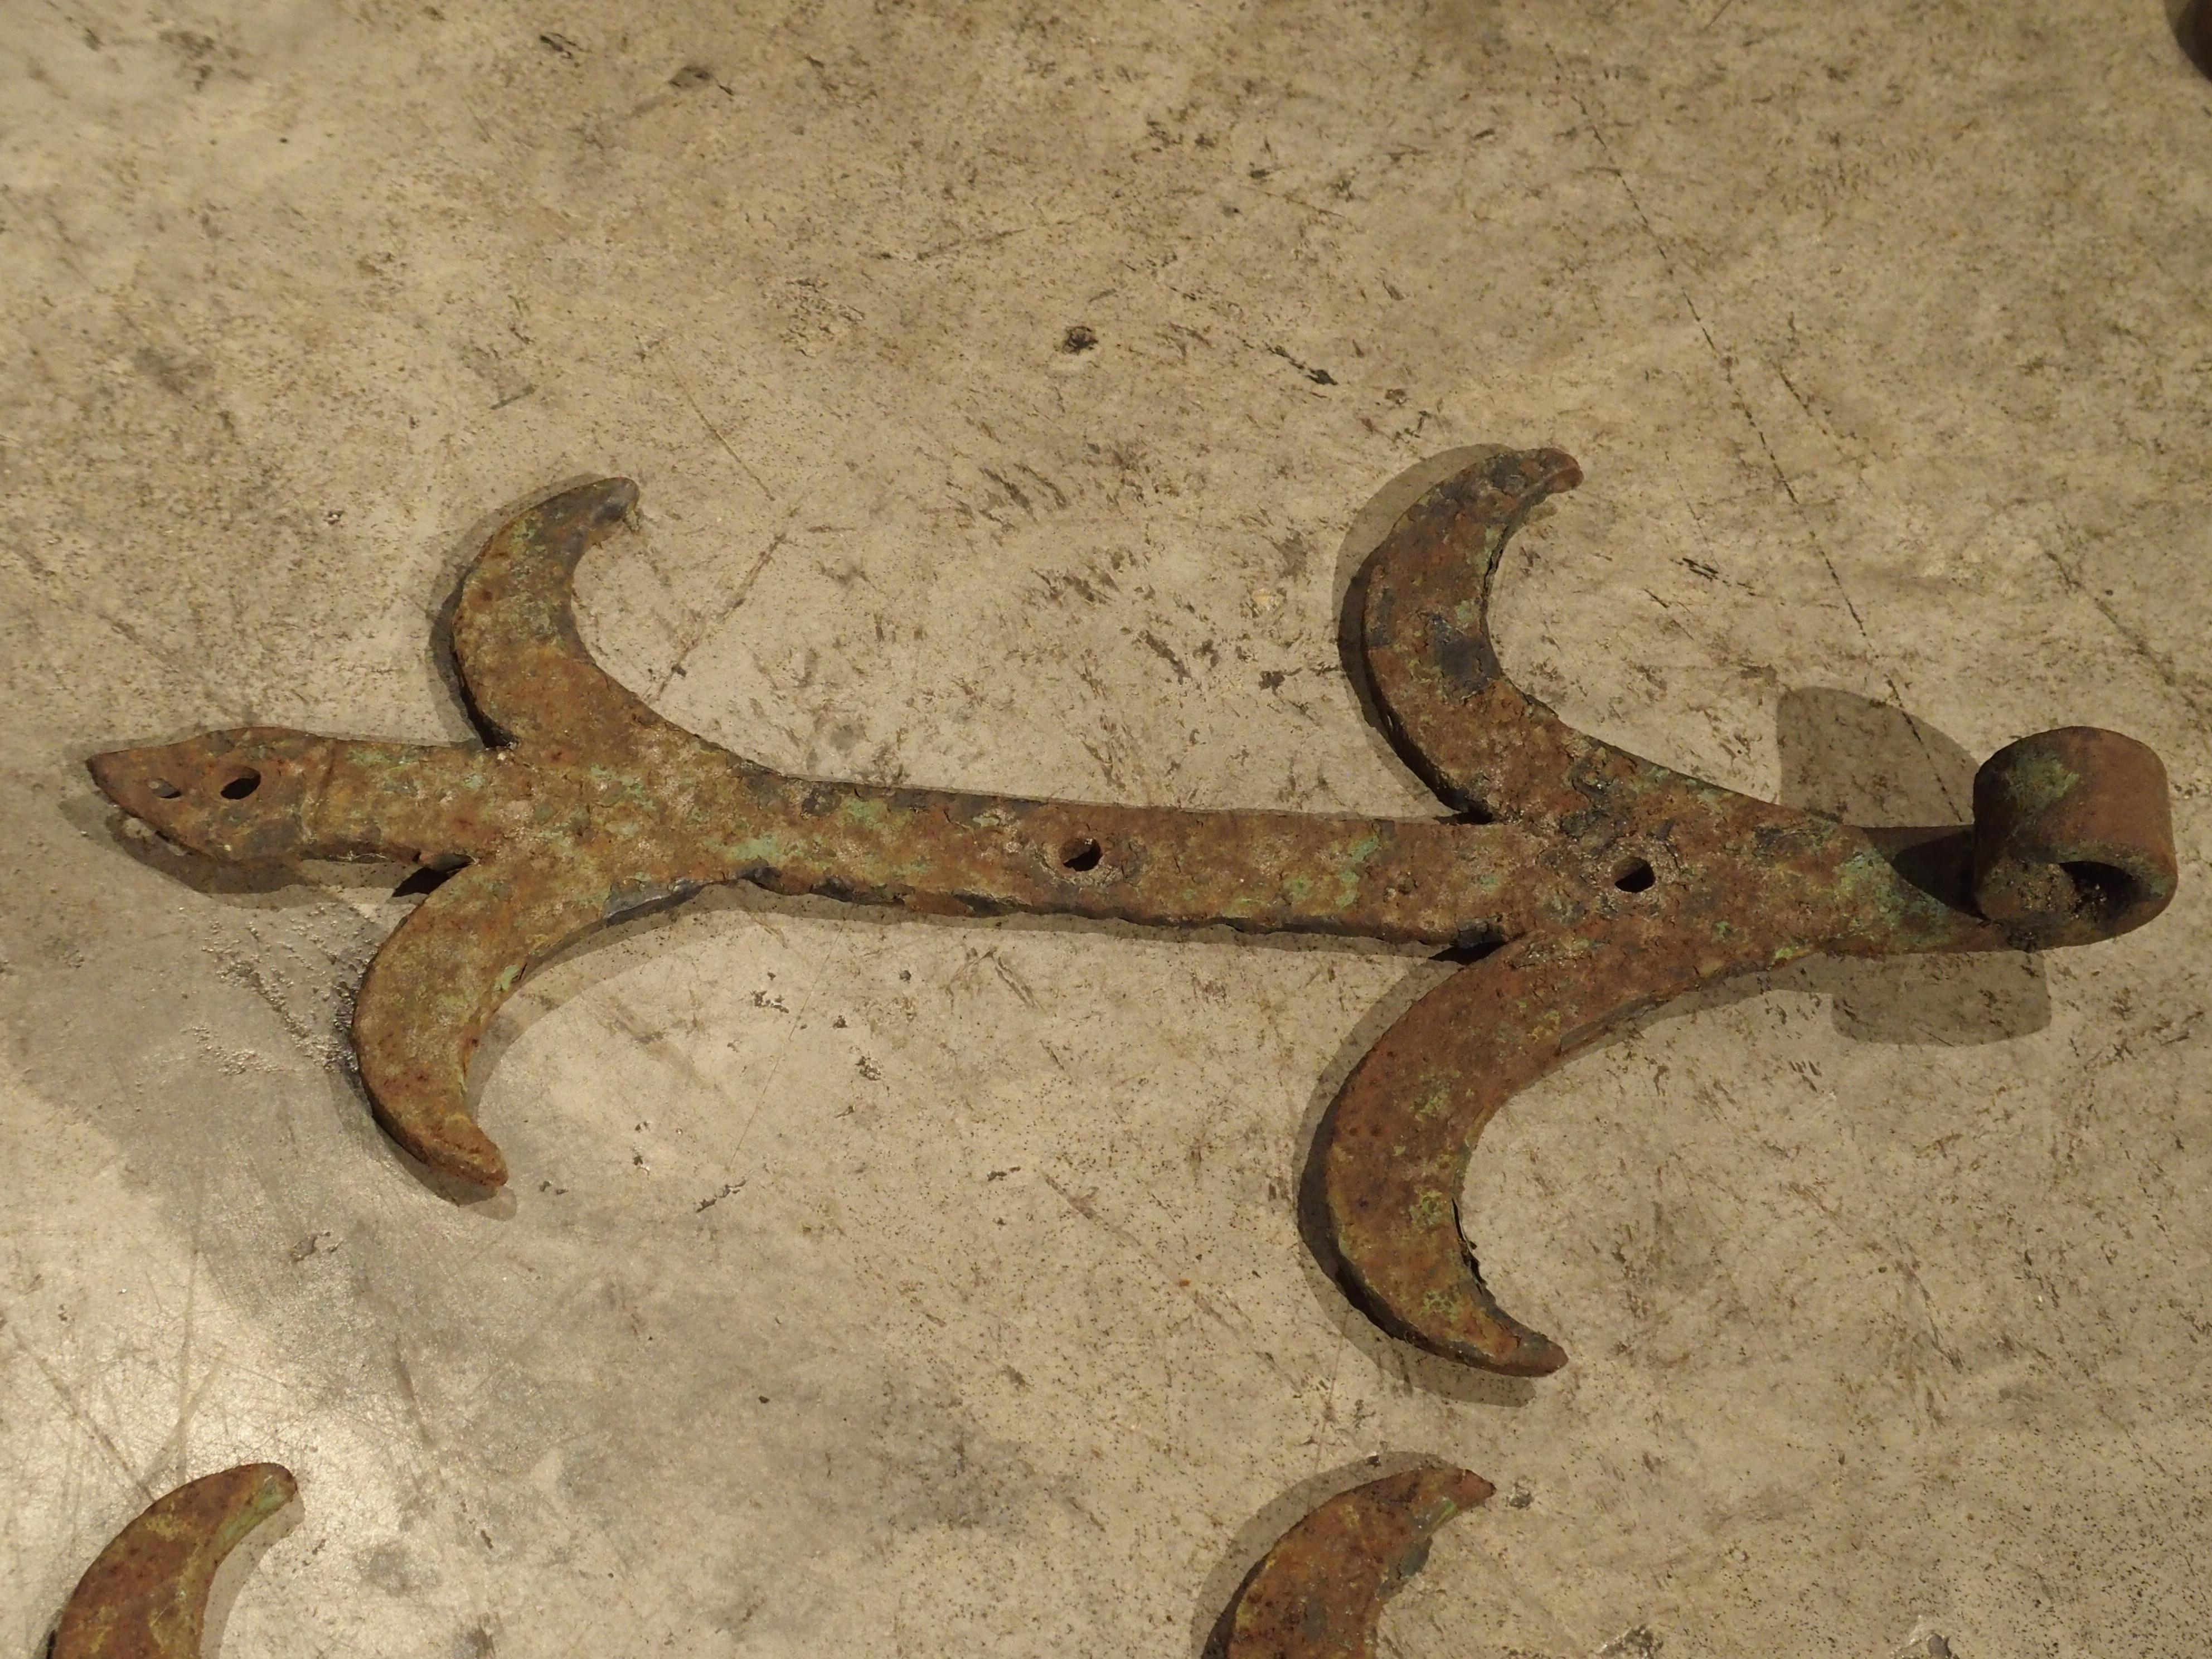 These wonderful iron door straps were salvaged from a door or set of doors sometime in the 20th century. There are 4 iron hinge straps that would have been on the same door or doors, and a 4th larger single strap. These would have decorated the